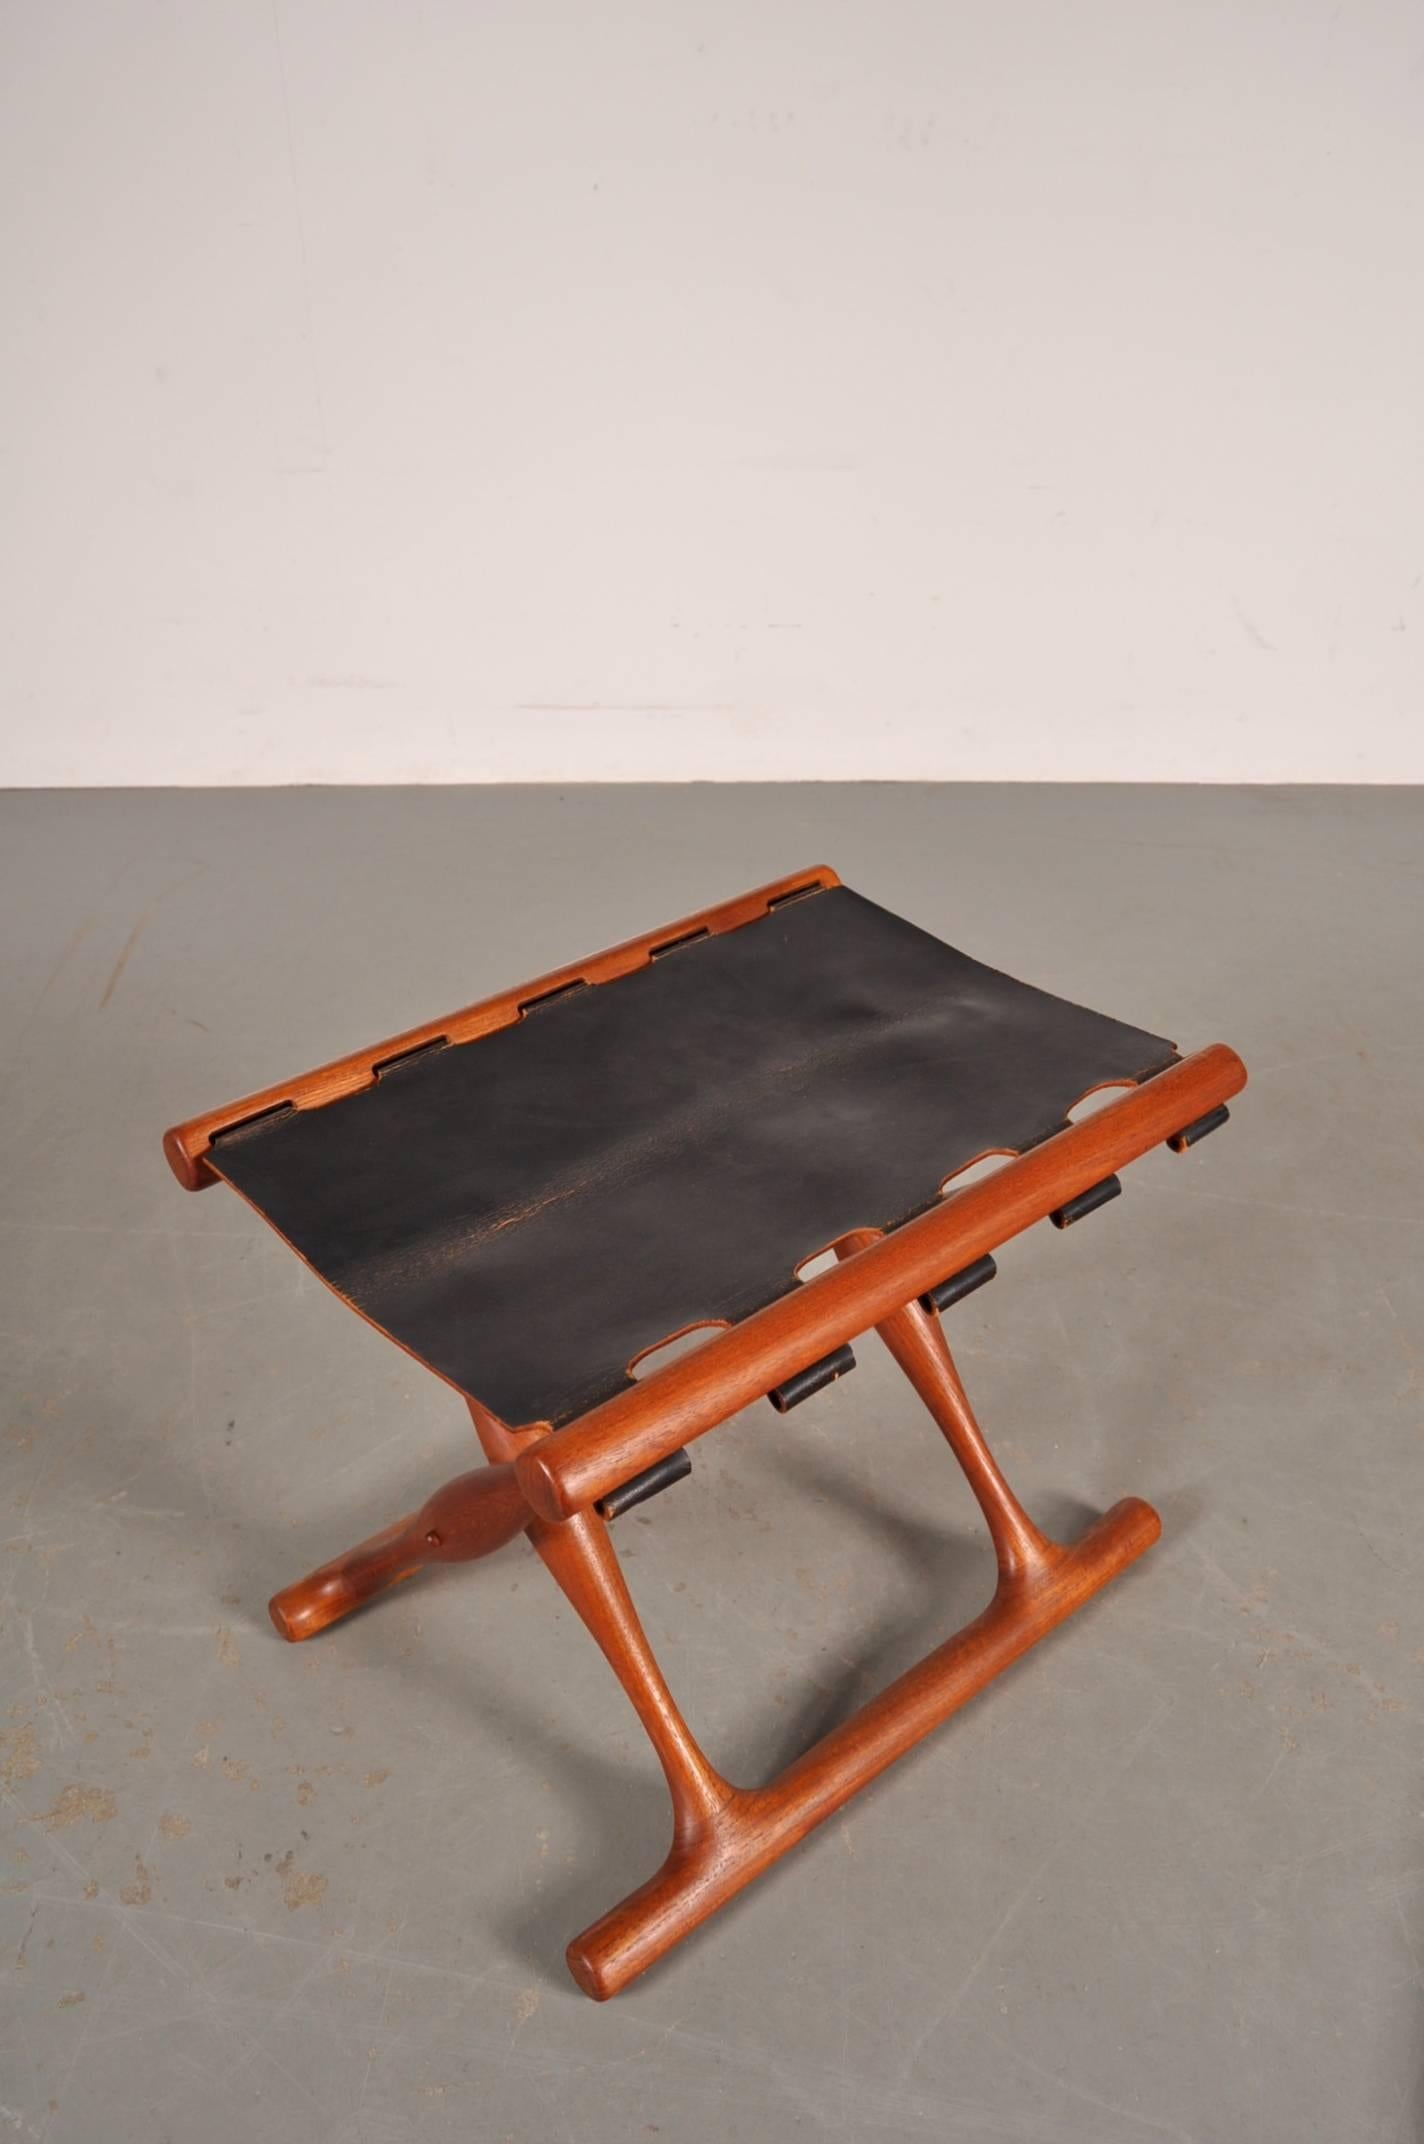 Mid-20th Century Folding Stool with Tray by Poul Hundevad for Domus Danica, Denmark, circa 1950